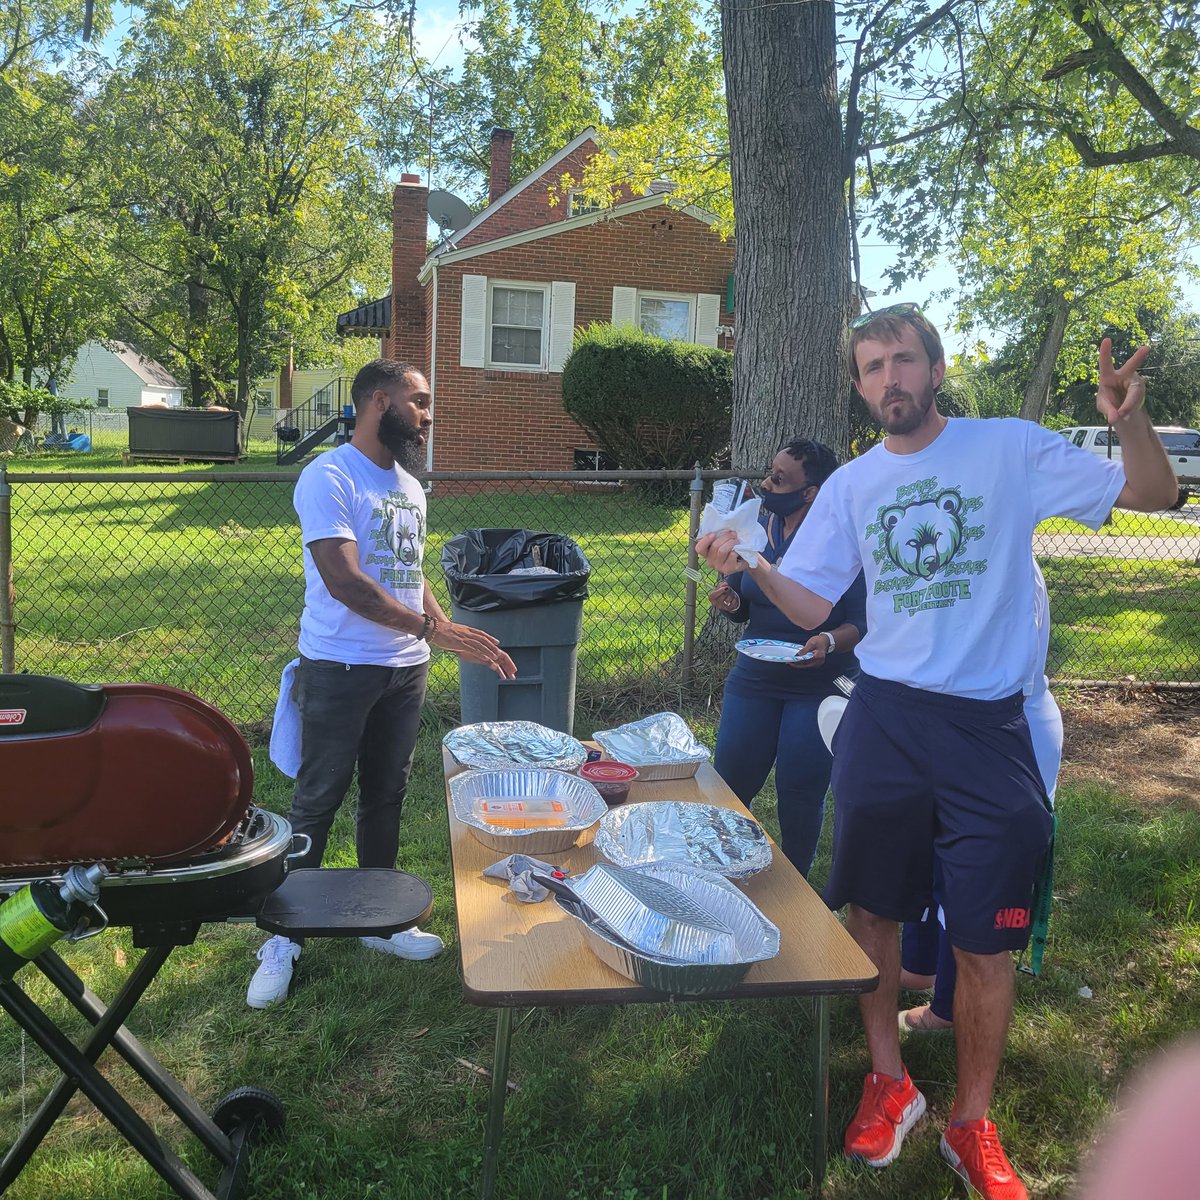 Another bonding activity on our first week back in school! @FortFoote_ES knows how to have fun and enjoy an afternoon BBQ cookout before our opening year block party! Great way to kick start a new school year! Go Bears!!! #PrideatTheFORT